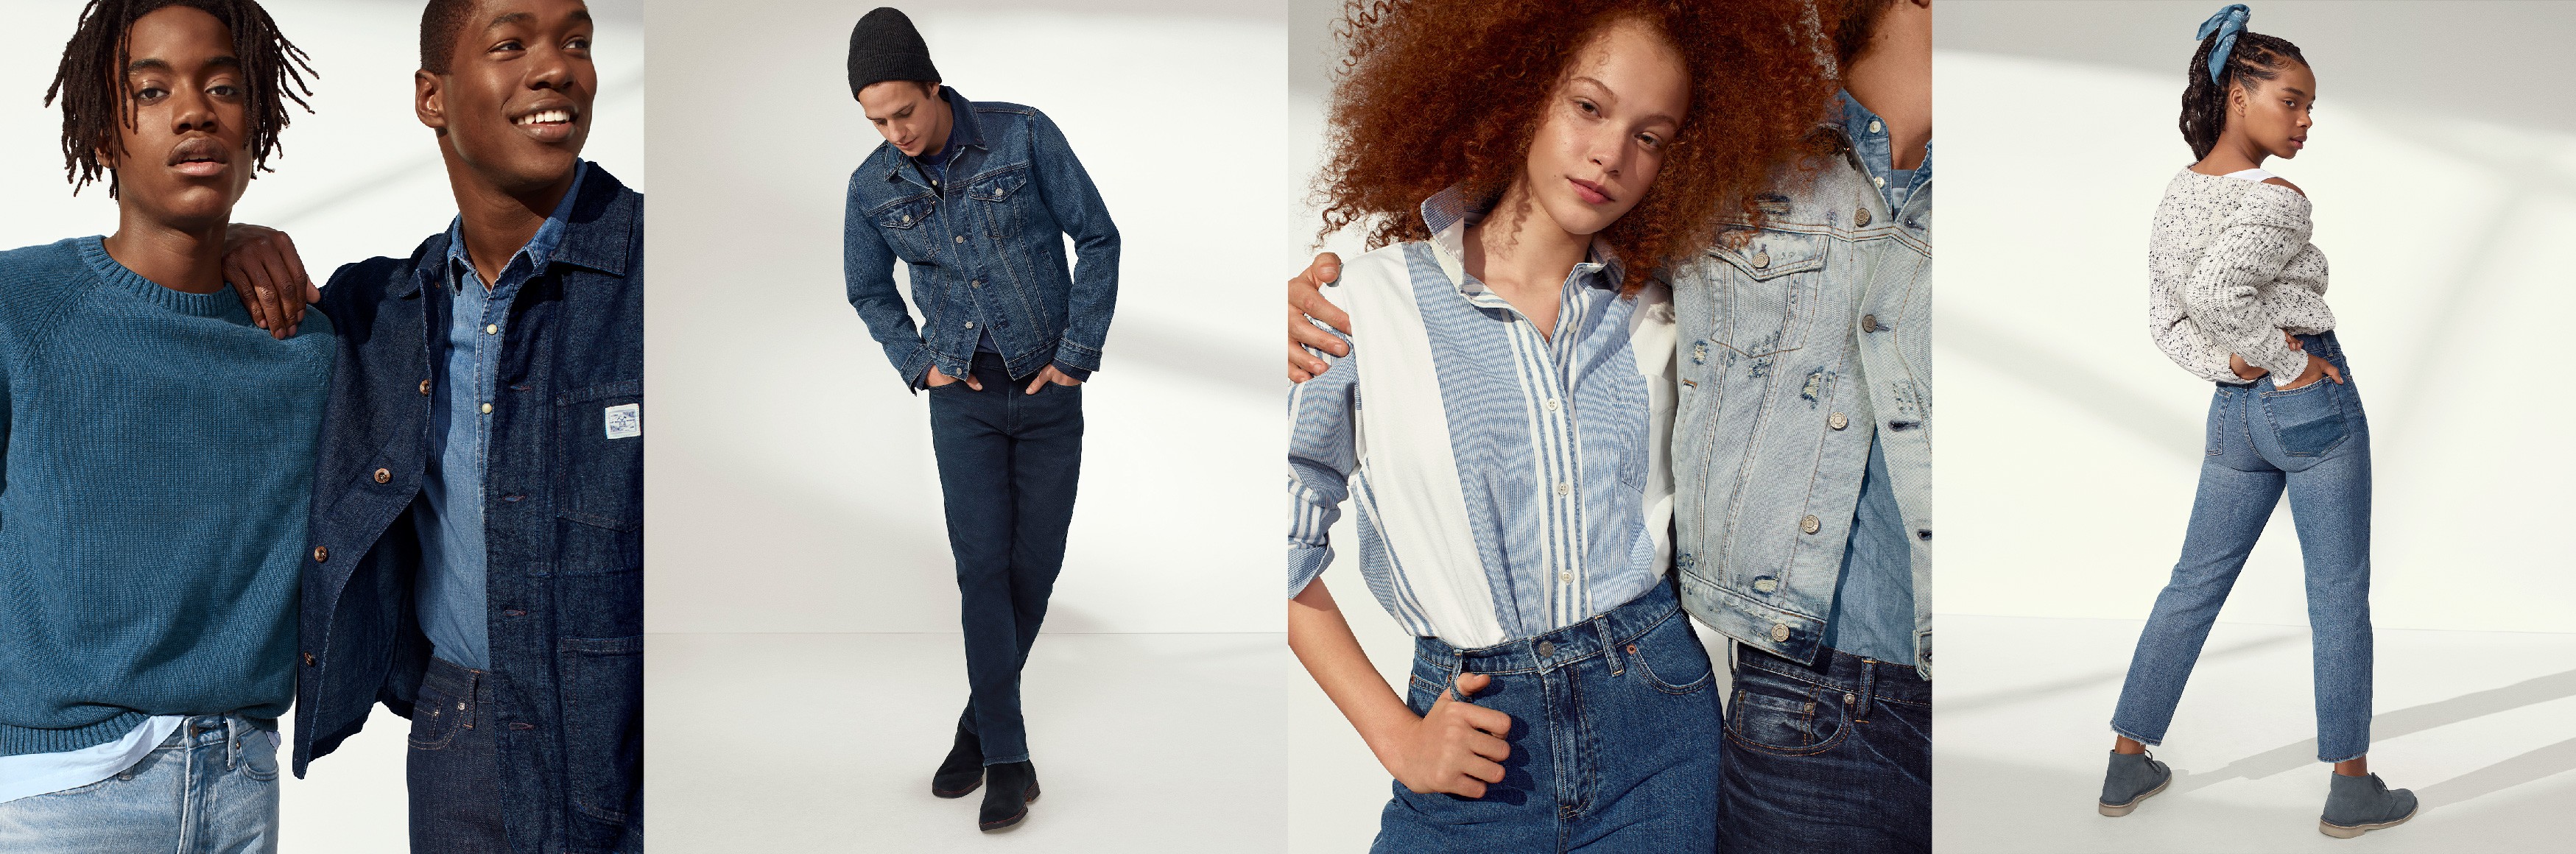 40% Off Everything with Code FFCARD + Extra 20% Off with Code CARD20 when you use Gap credit card